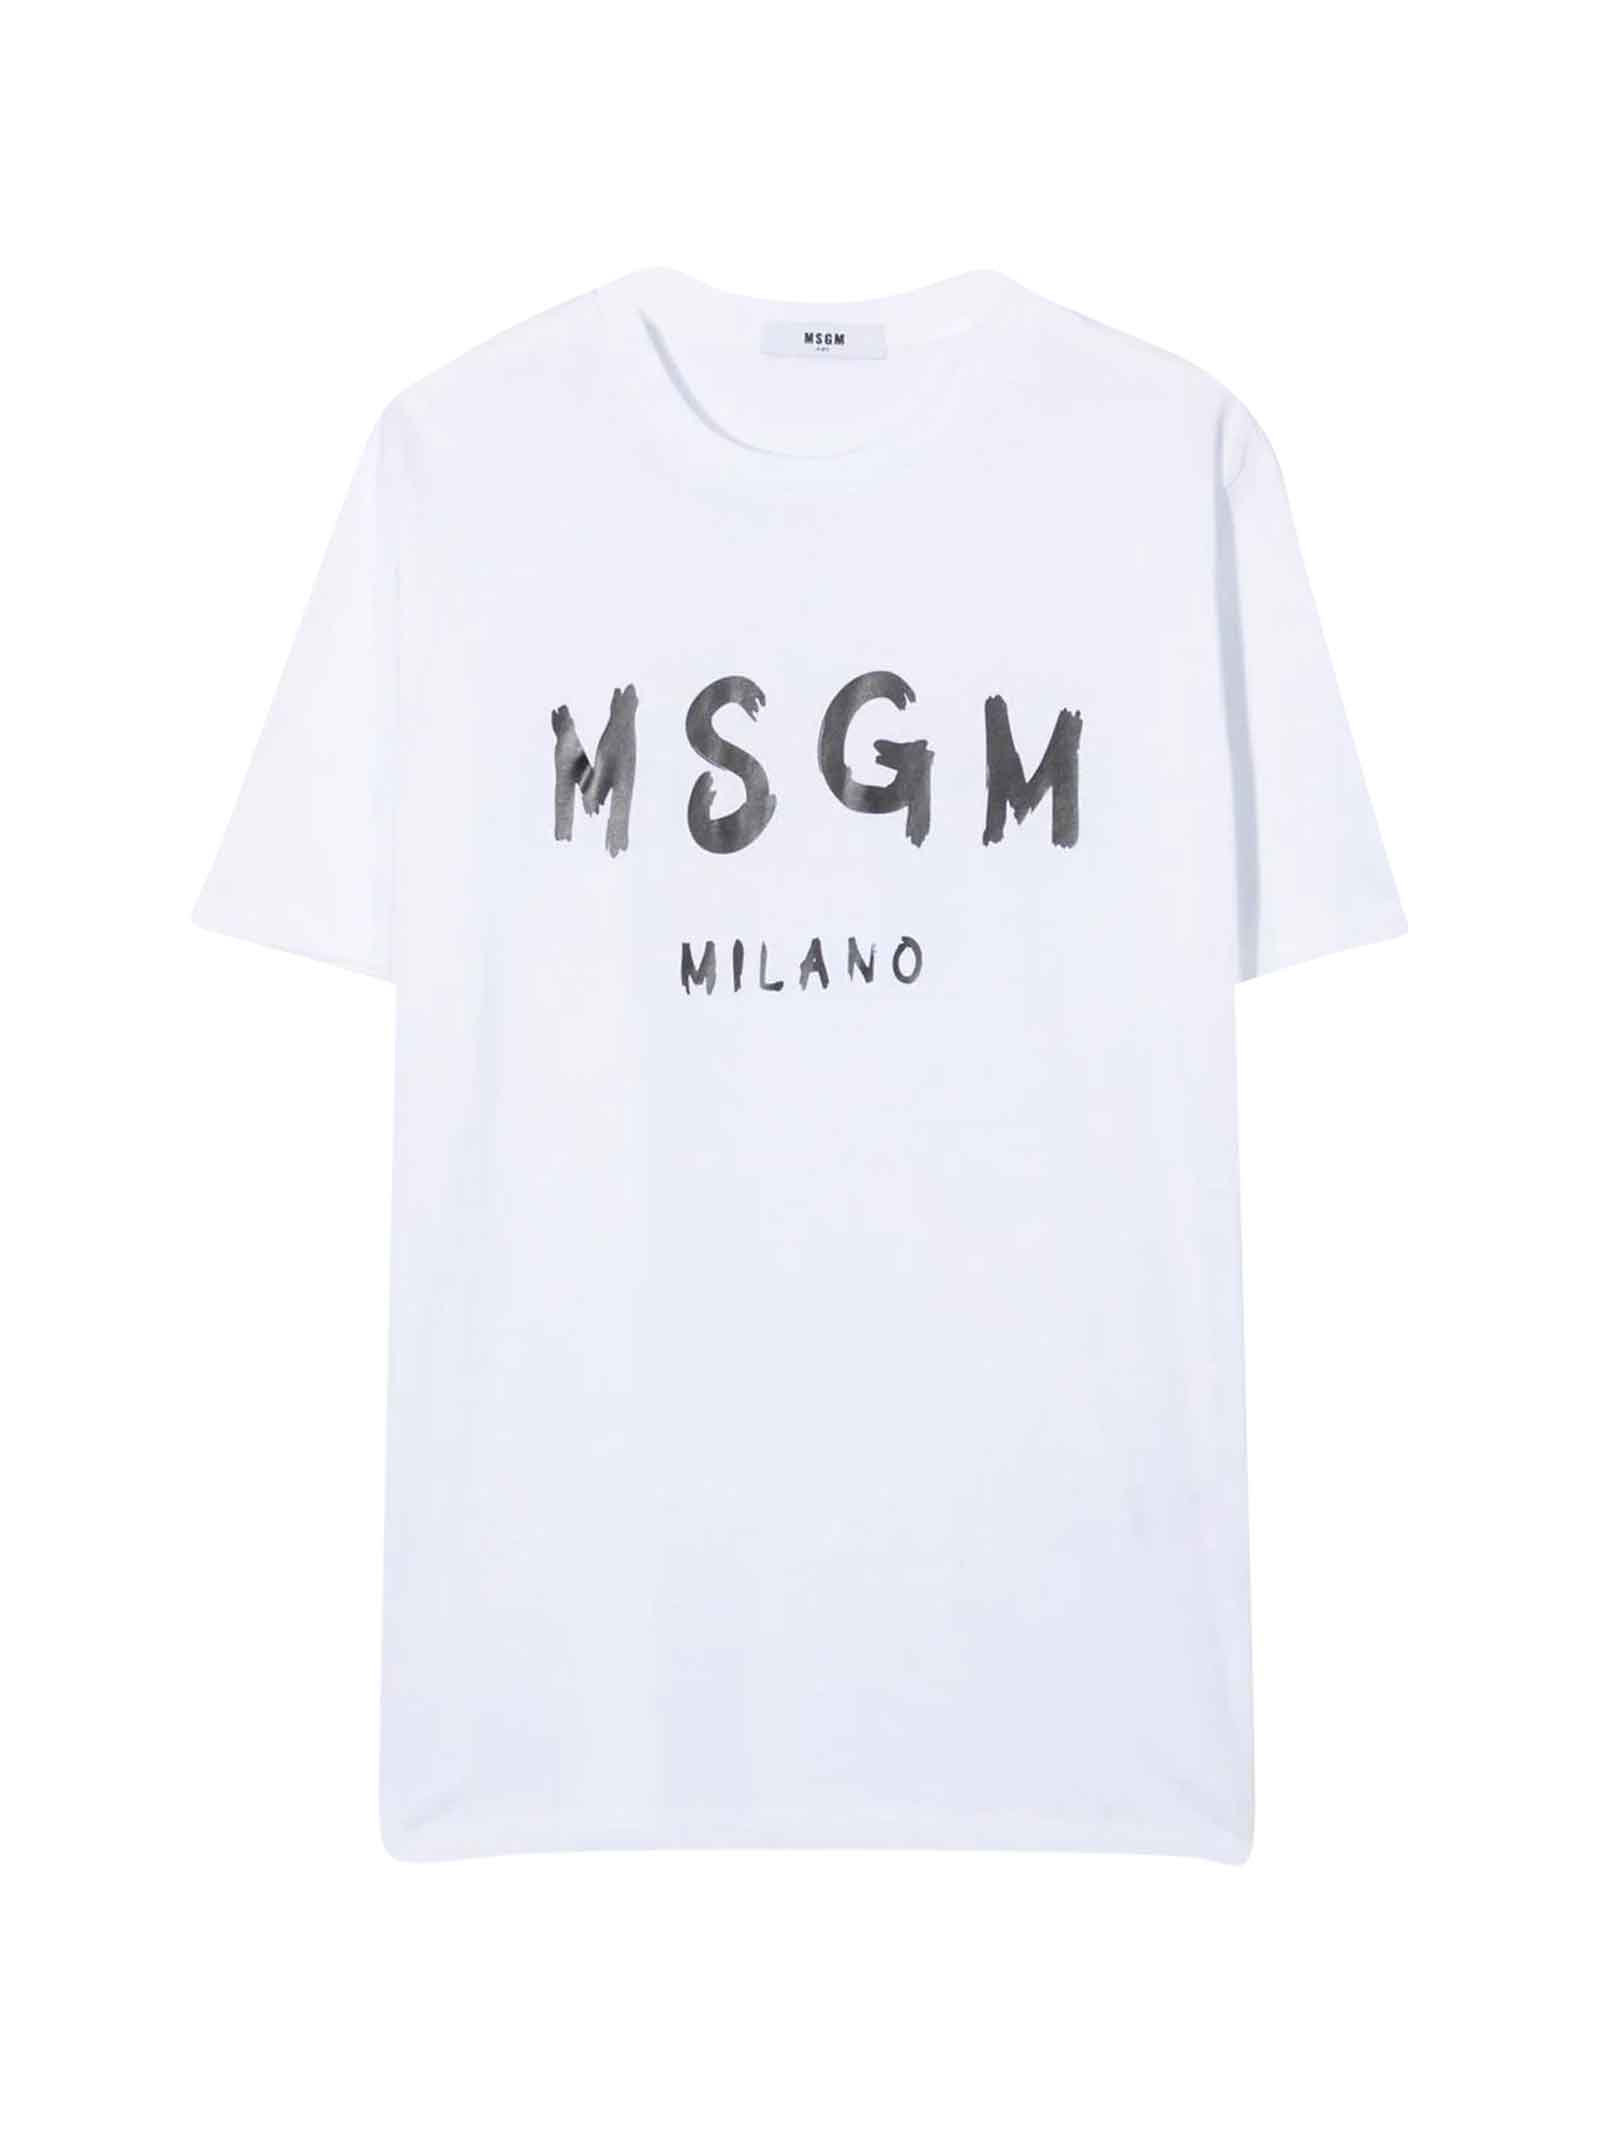 Msgm Kids' White Unisex T-shirt With Logo On The Front, Round Neckline, Short Sleeves And Straight Hem By . In Bianca